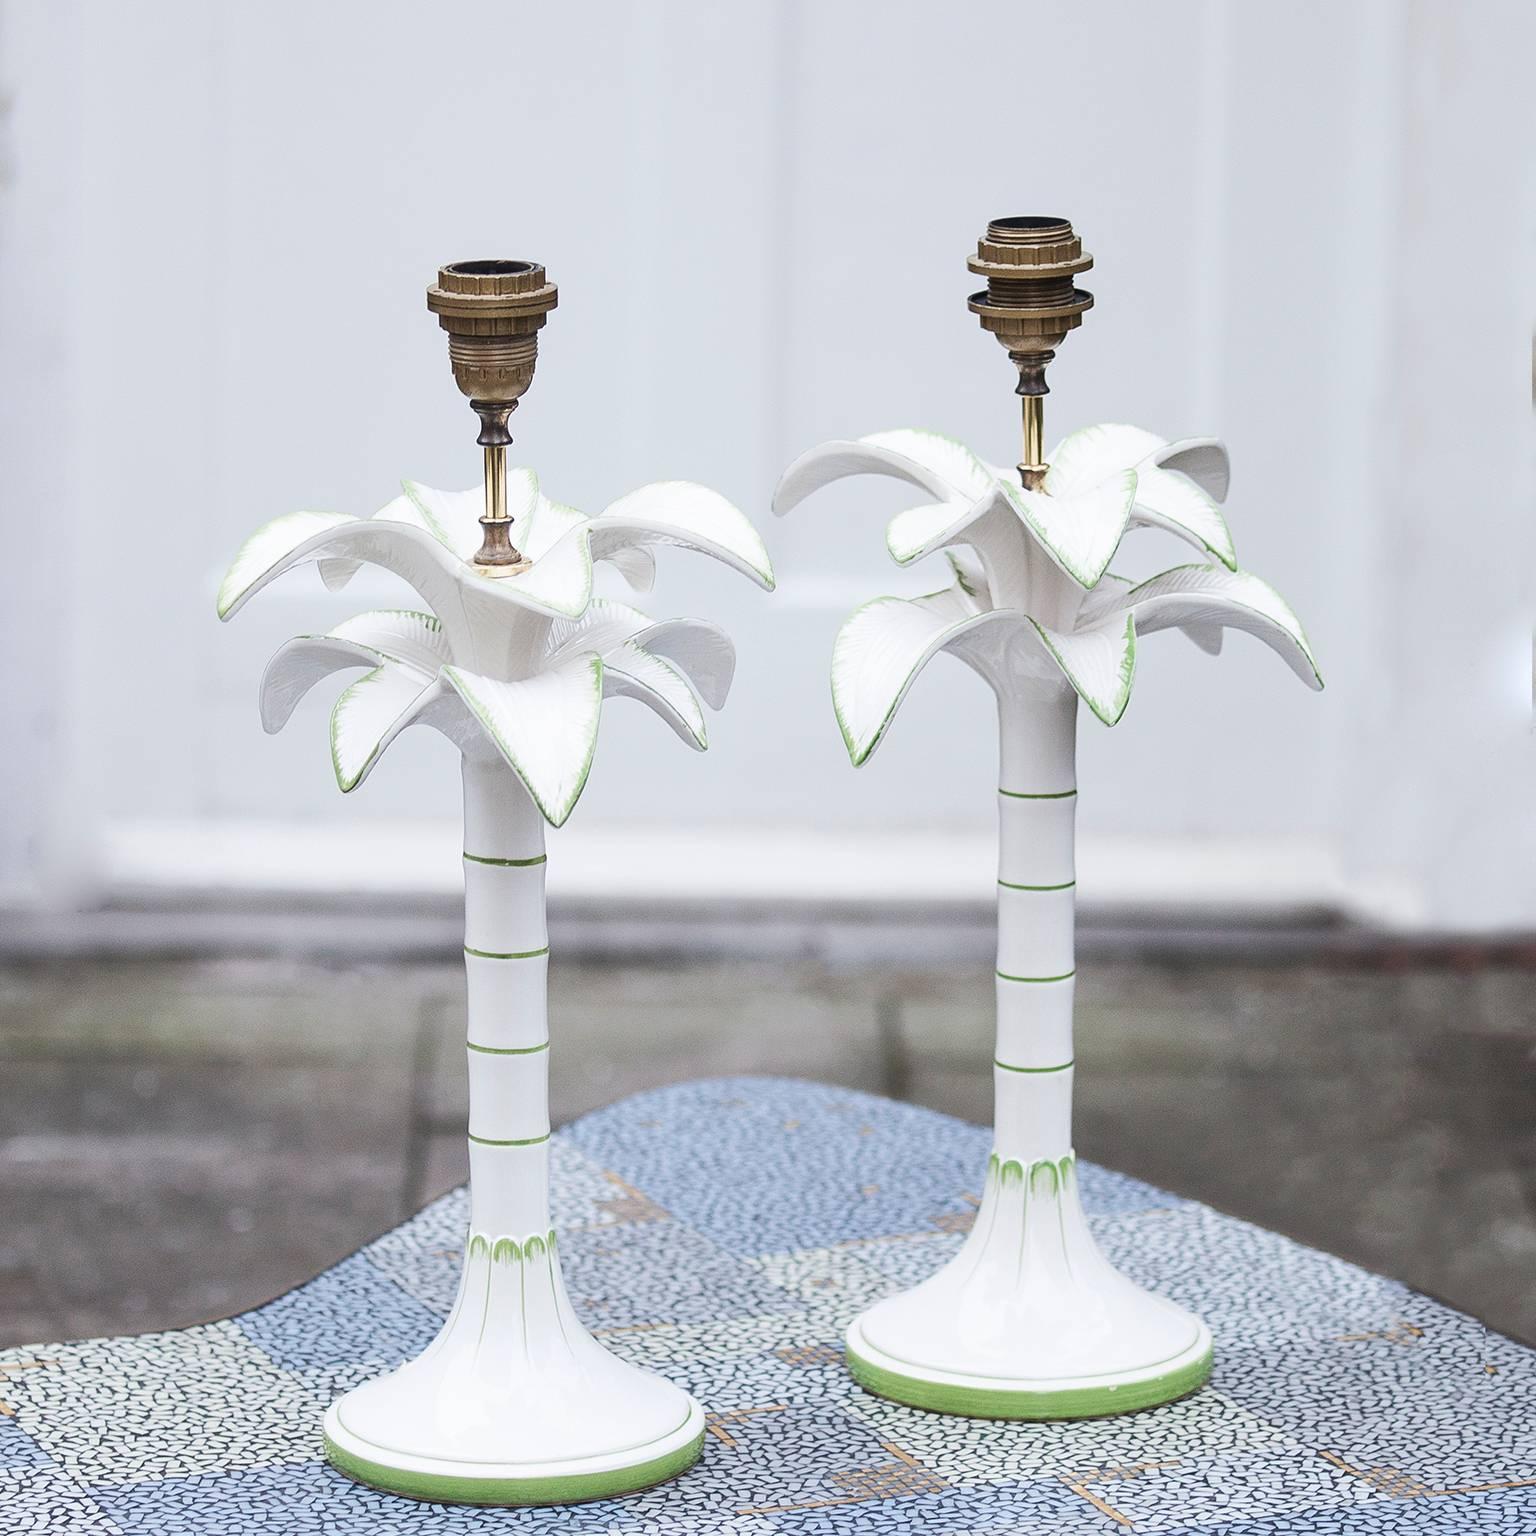 Beautiful sculptural palm table lamps from Italy 1968,
they are made in fine white and green porcelain.
Measures: H 56 x D 28 cm.